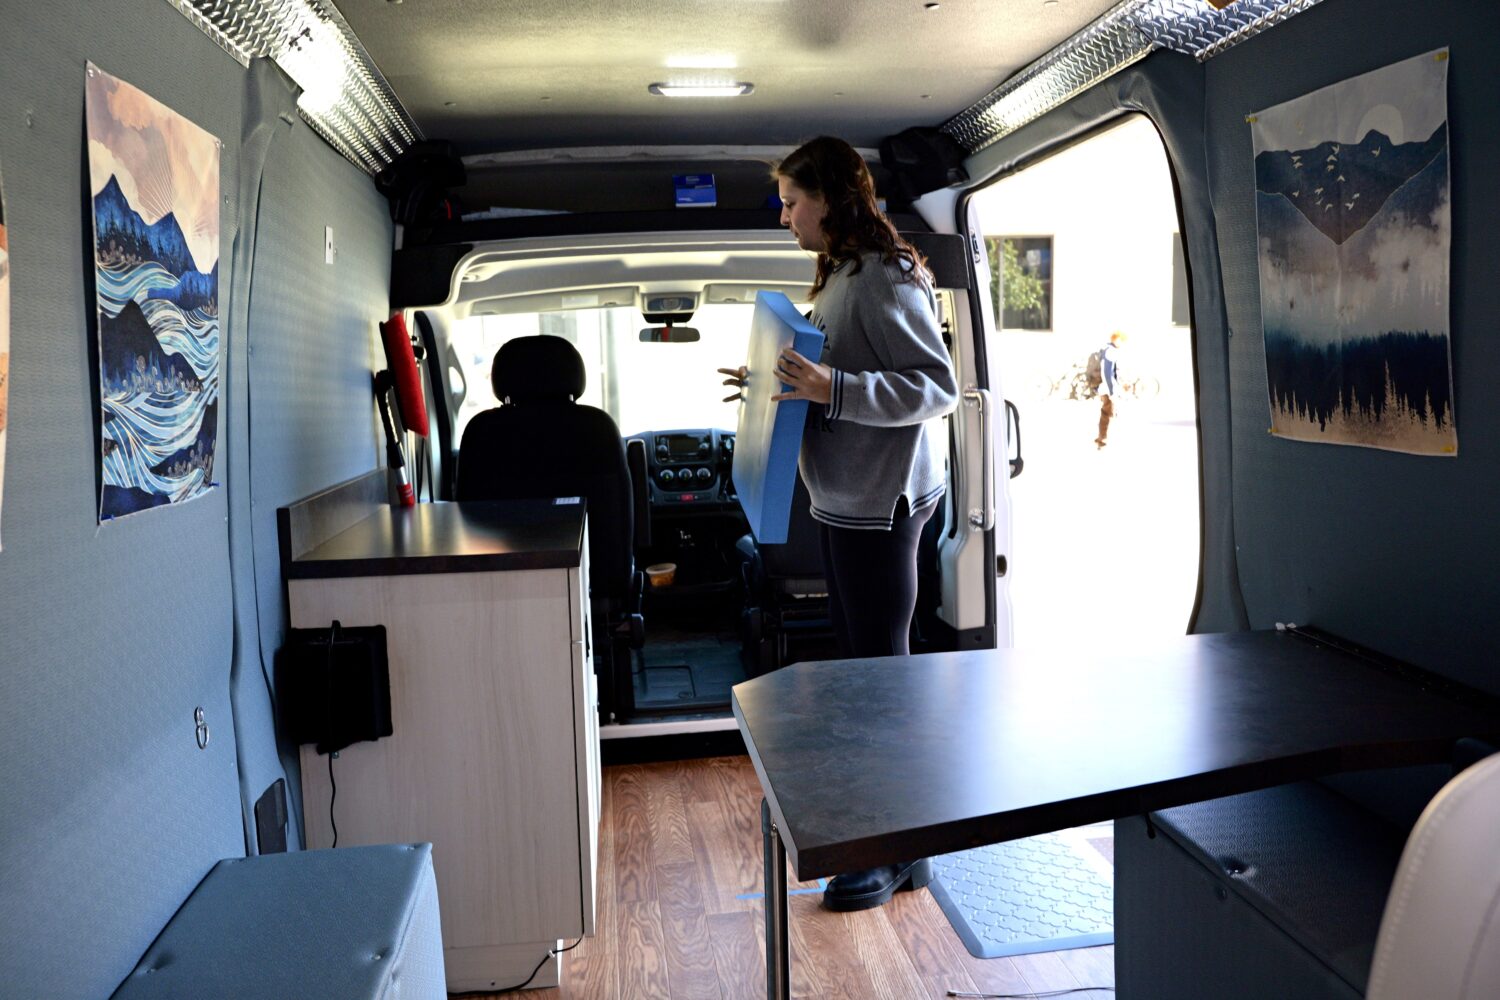 Conference attendees learn about the canniabis research vehicle called the Cannavan.